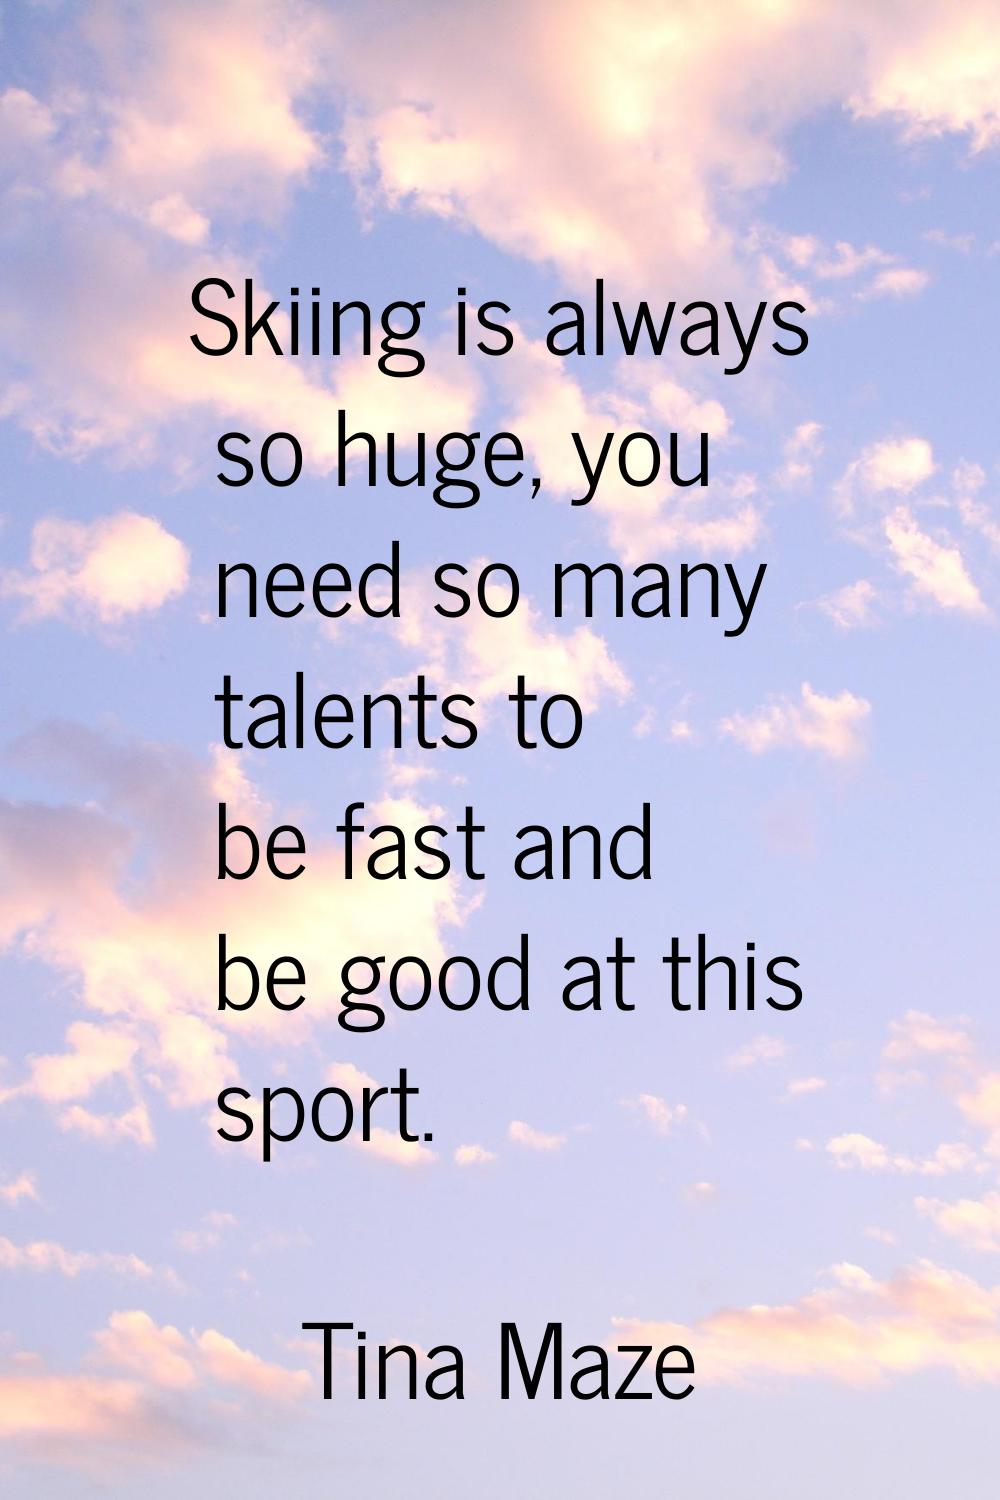 Skiing is always so huge, you need so many talents to be fast and be good at this sport.